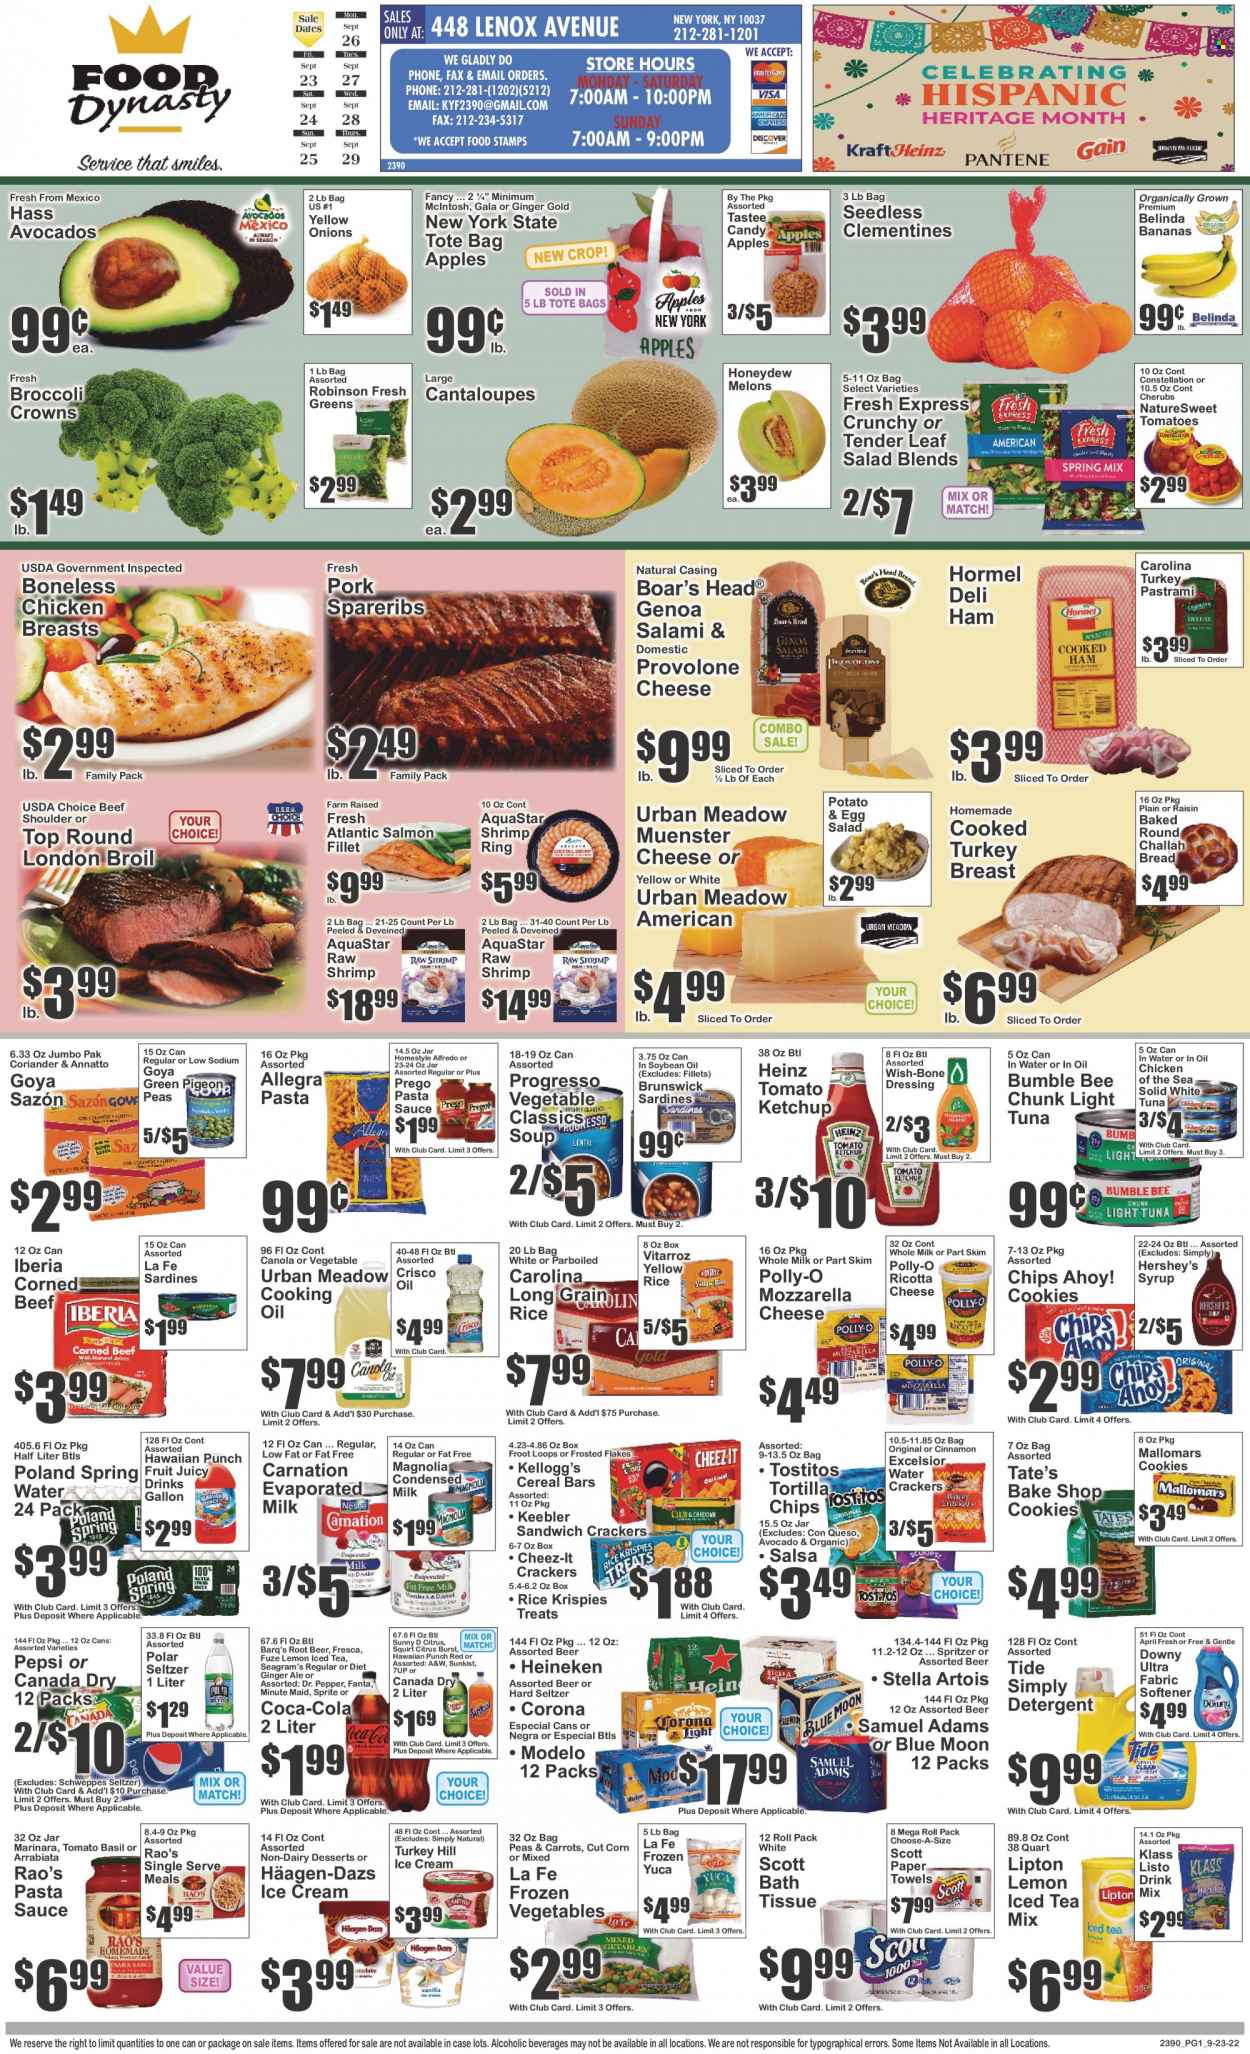 thumbnail - Food Dynasty Flyer - 09/23/2022 - 09/29/2022 - Sales products - bread, challah, cantaloupe, corn, salad, apples, avocado, Gala, honeydew, salmon, salmon fillet, sardines, tuna, shrimps, pasta sauce, soup, Bumble Bee, sauce, Progresso, Hormel, salami, ham, pastrami, corned beef, mozzarella, ricotta, Münster cheese, Provolone, evaporated milk, condensed milk, eggs, ice cream, Hershey's, Häagen-Dazs, frozen vegetables, cookies, cereal bar, crackers, Kellogg's, Chips Ahoy!, Keebler, tortilla chips, Cheez-It, Tostitos, Crisco, Heinz, light tuna, Chicken of the Sea, Goya, cereals, Rice Krispies, Frosted Flakes, toor dal, long grain rice, cinnamon, coriander, ketchup, dressing, salsa, soya oil, cooking oil, syrup, Canada Dry, Coca-Cola, ginger ale, Schweppes, Sprite, Pepsi, Fanta, Lipton, ice tea, Dr. Pepper, 7UP, A&W, fruit punch, Hard Seltzer, beer, Corona Extra, Heineken, Modelo, turkey breast, chicken breasts, beef meat, pork spare ribs, bath tissue, Scott, kitchen towels, paper towels, detergent, Tide, fabric softener, Downy Laundry, Lenox, Pigeon, tote, tote bag, clementines, Stella Artois, melons, Blue Moon. Page 1.